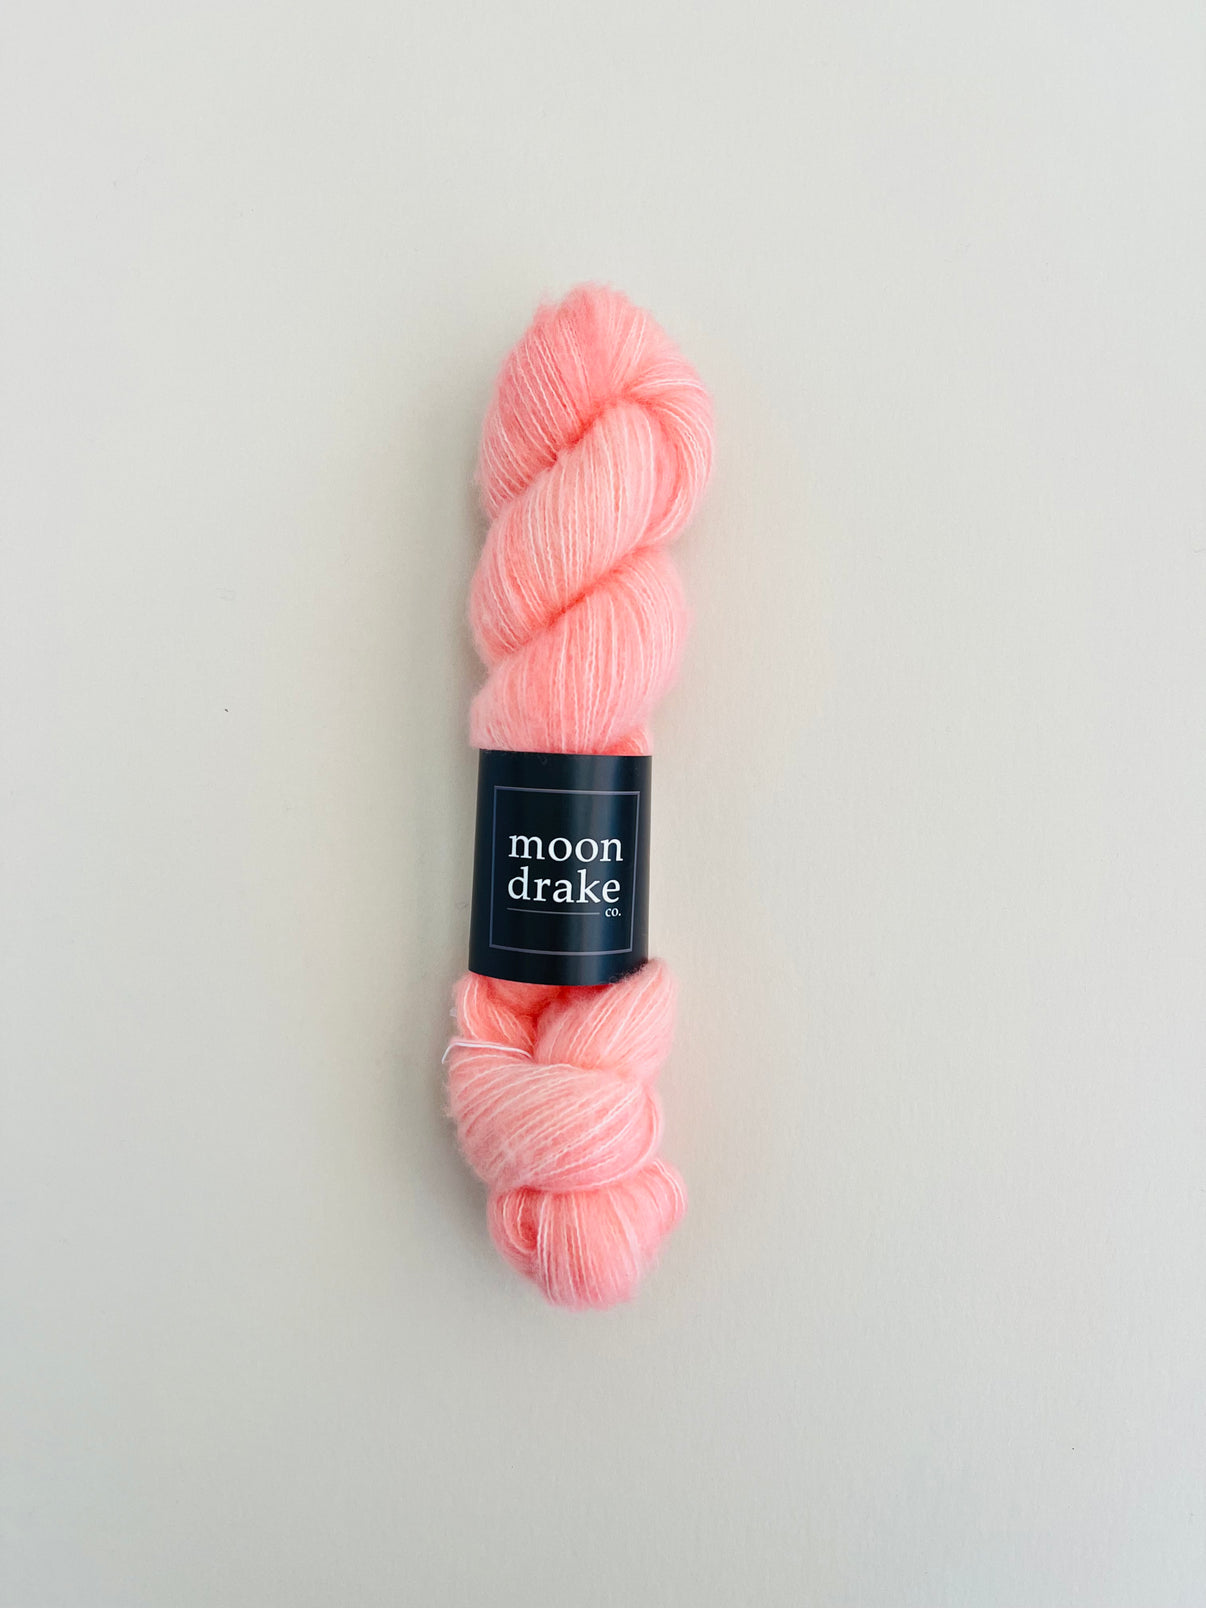 A coral skein of fuzzy textured yarn with a black label that reads "Moon Drake Co"